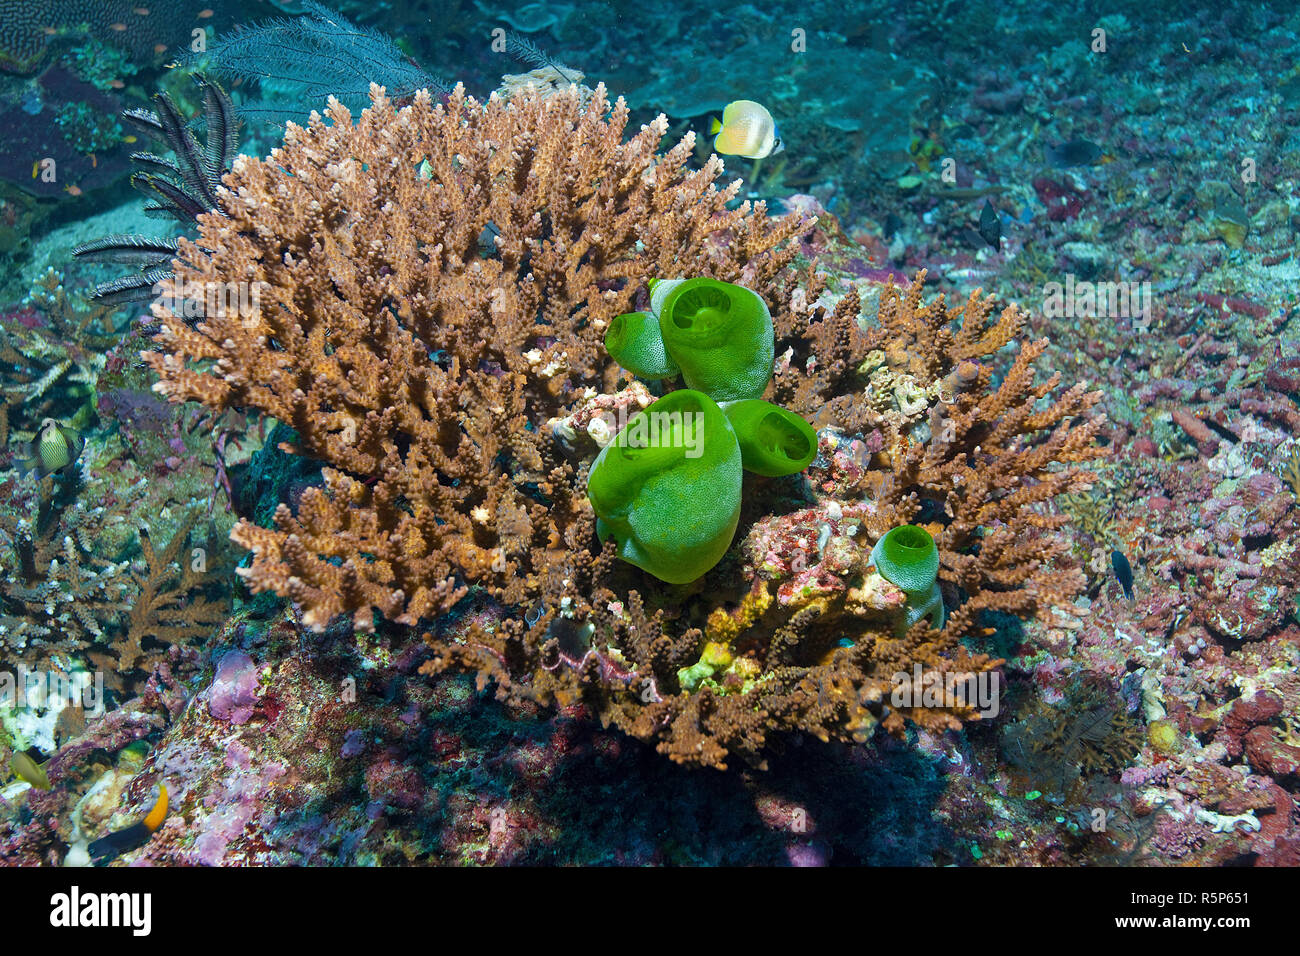 Tall urn ascidian, Green barrel sea squirt or Green reef sea-squirt (Didemnum molle), on a stone coral (Scleractinia), Sulawesi, Indonesia Stock Photo